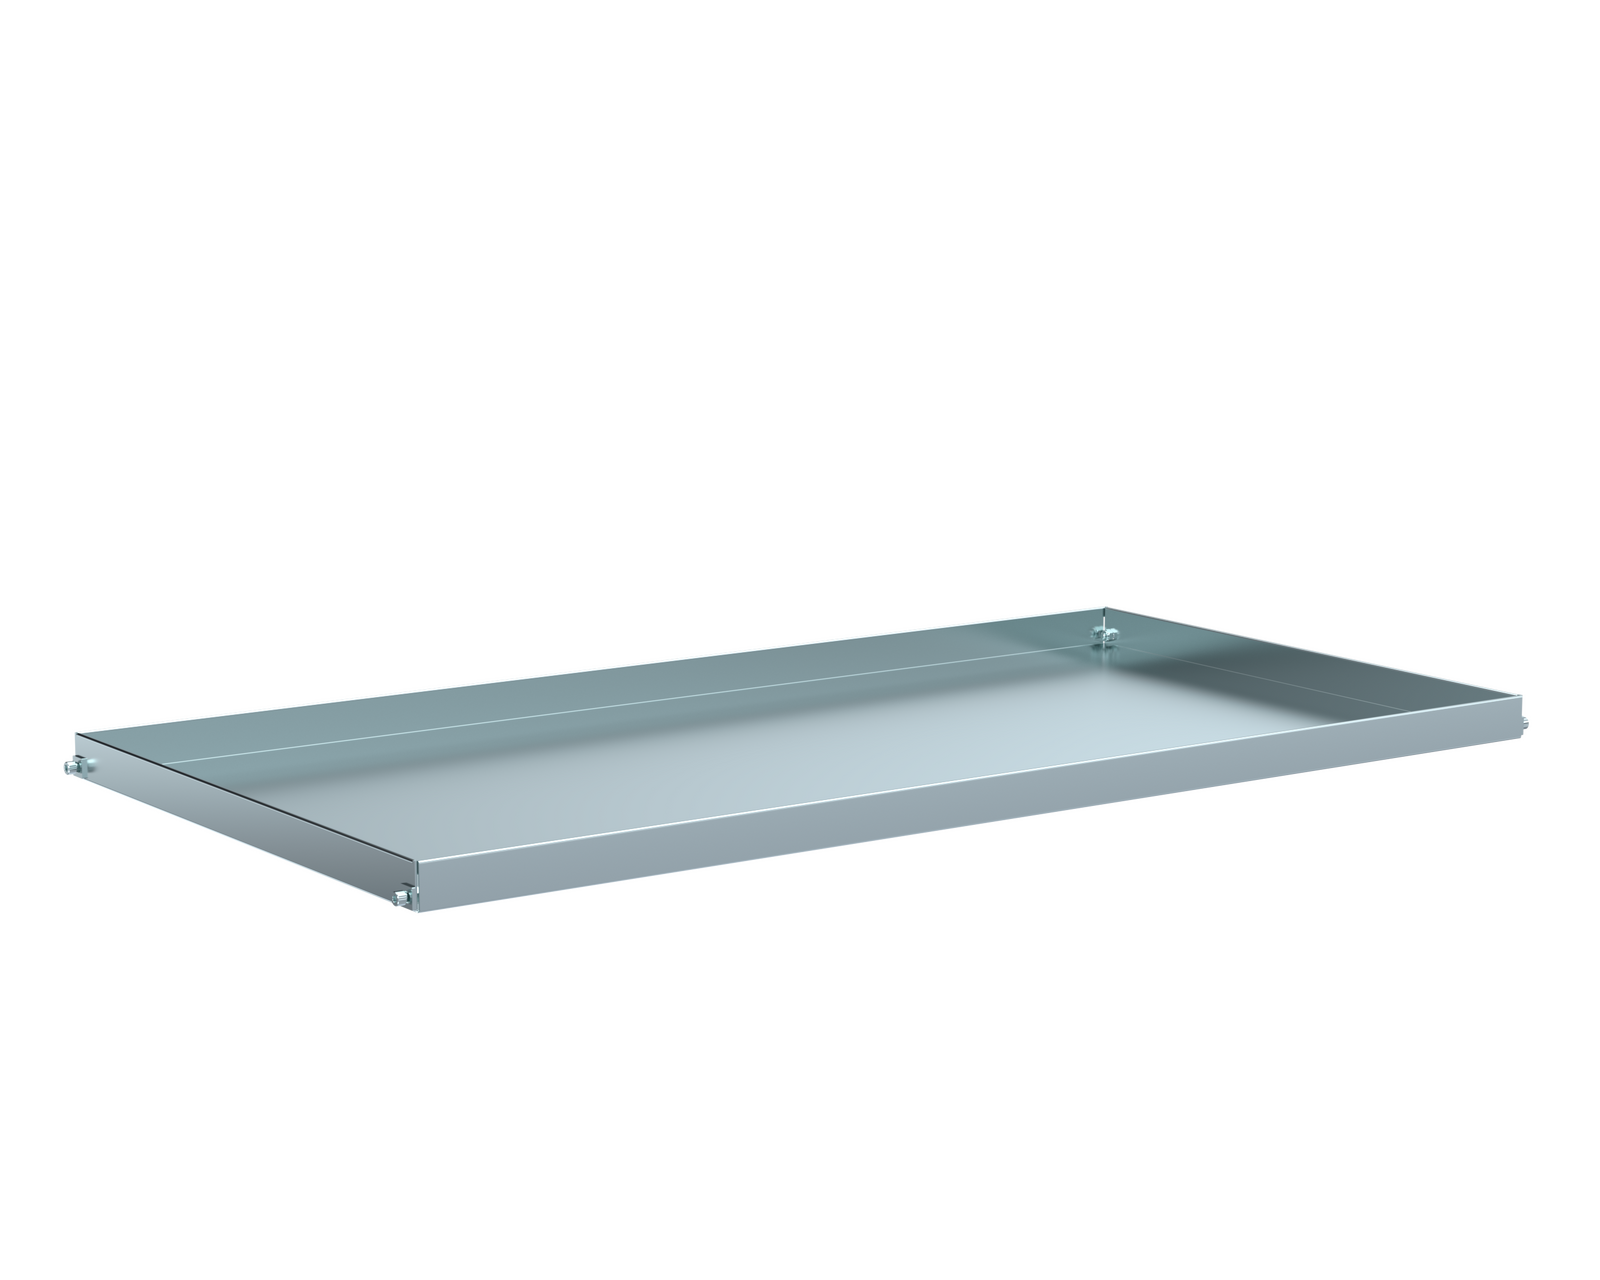 Reversible Solid/Tray Shelf to suit 